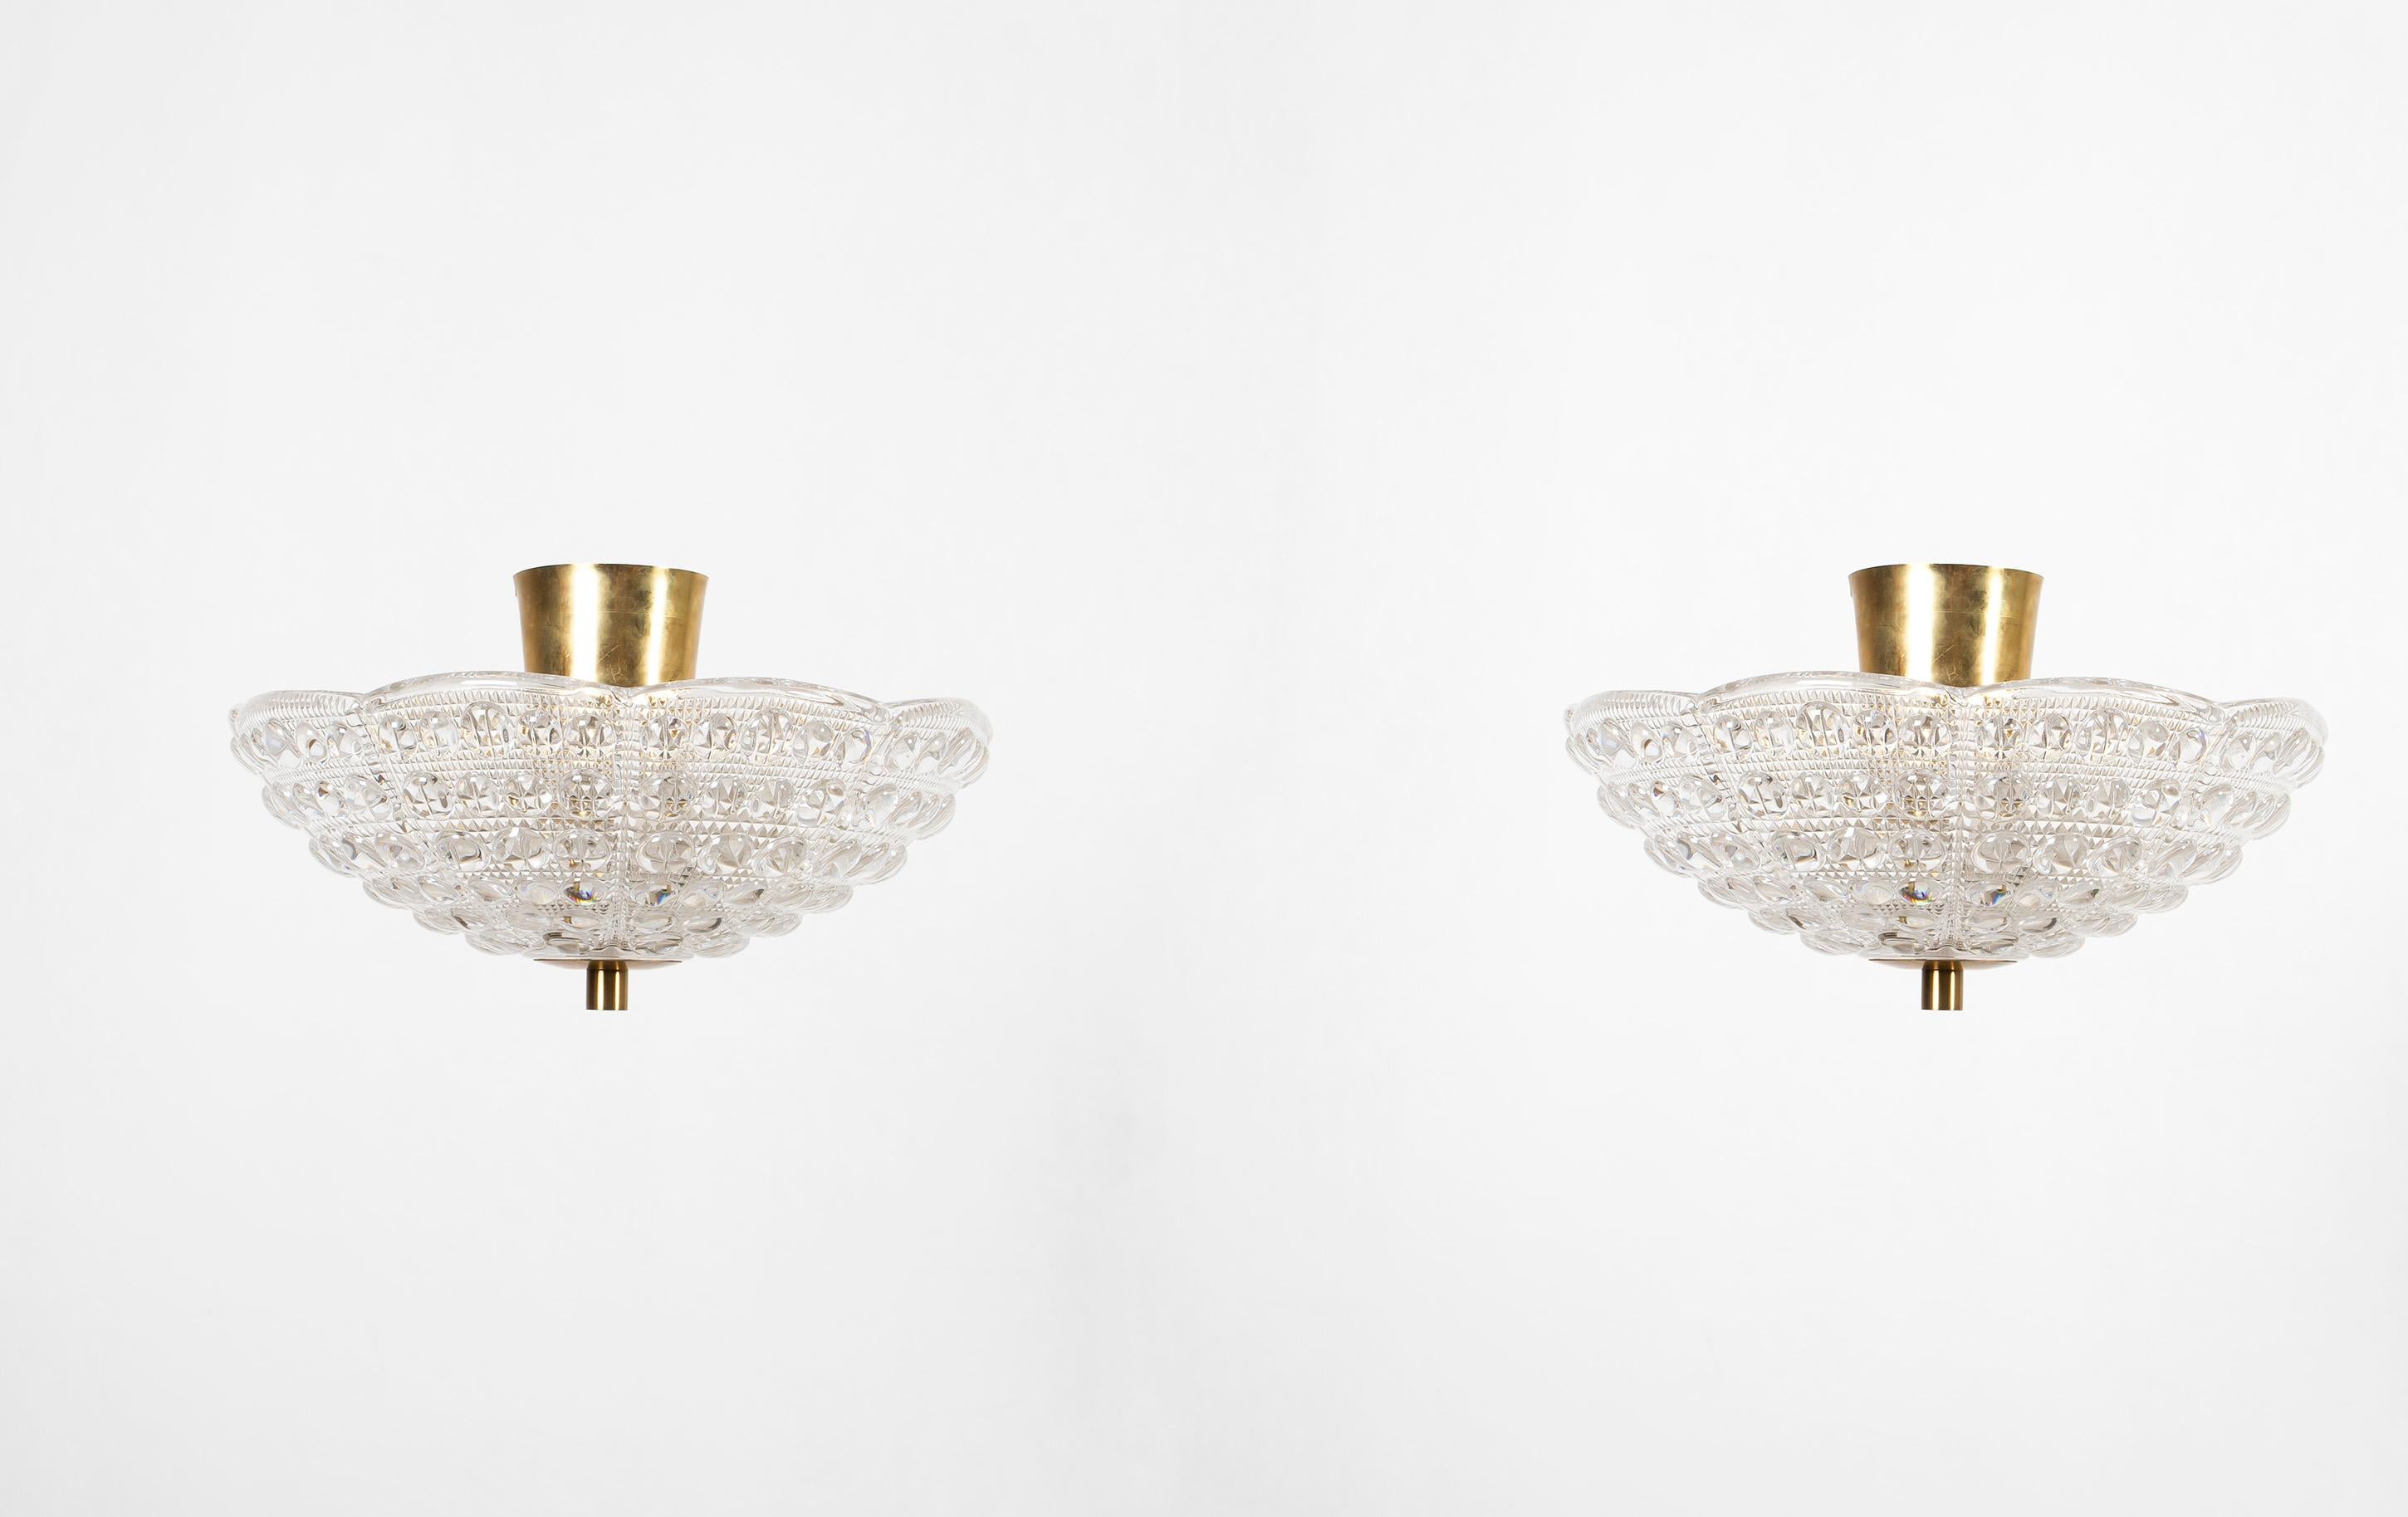 Pair of decorative flush mount lights with heavy crystal glass shade and brass base. Designed by Carl Fagerlund and made in Sweden by Orrefors. Both lamps are fully working and in good vintage condition. They are each fitted with three E27 bulb